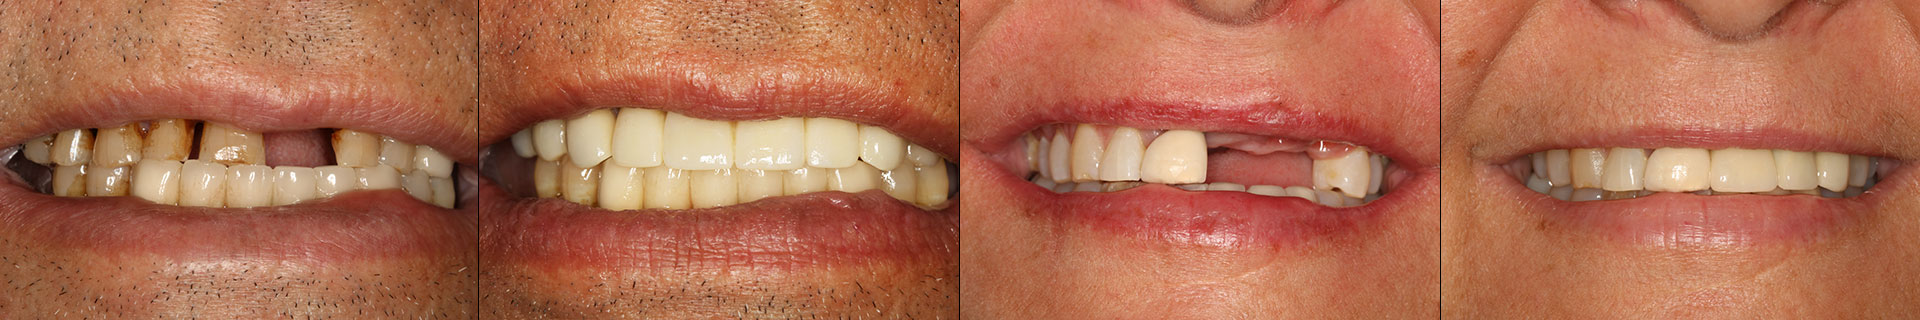 All on Four Dental Implants in Pembroke Pines, FL, Before and After